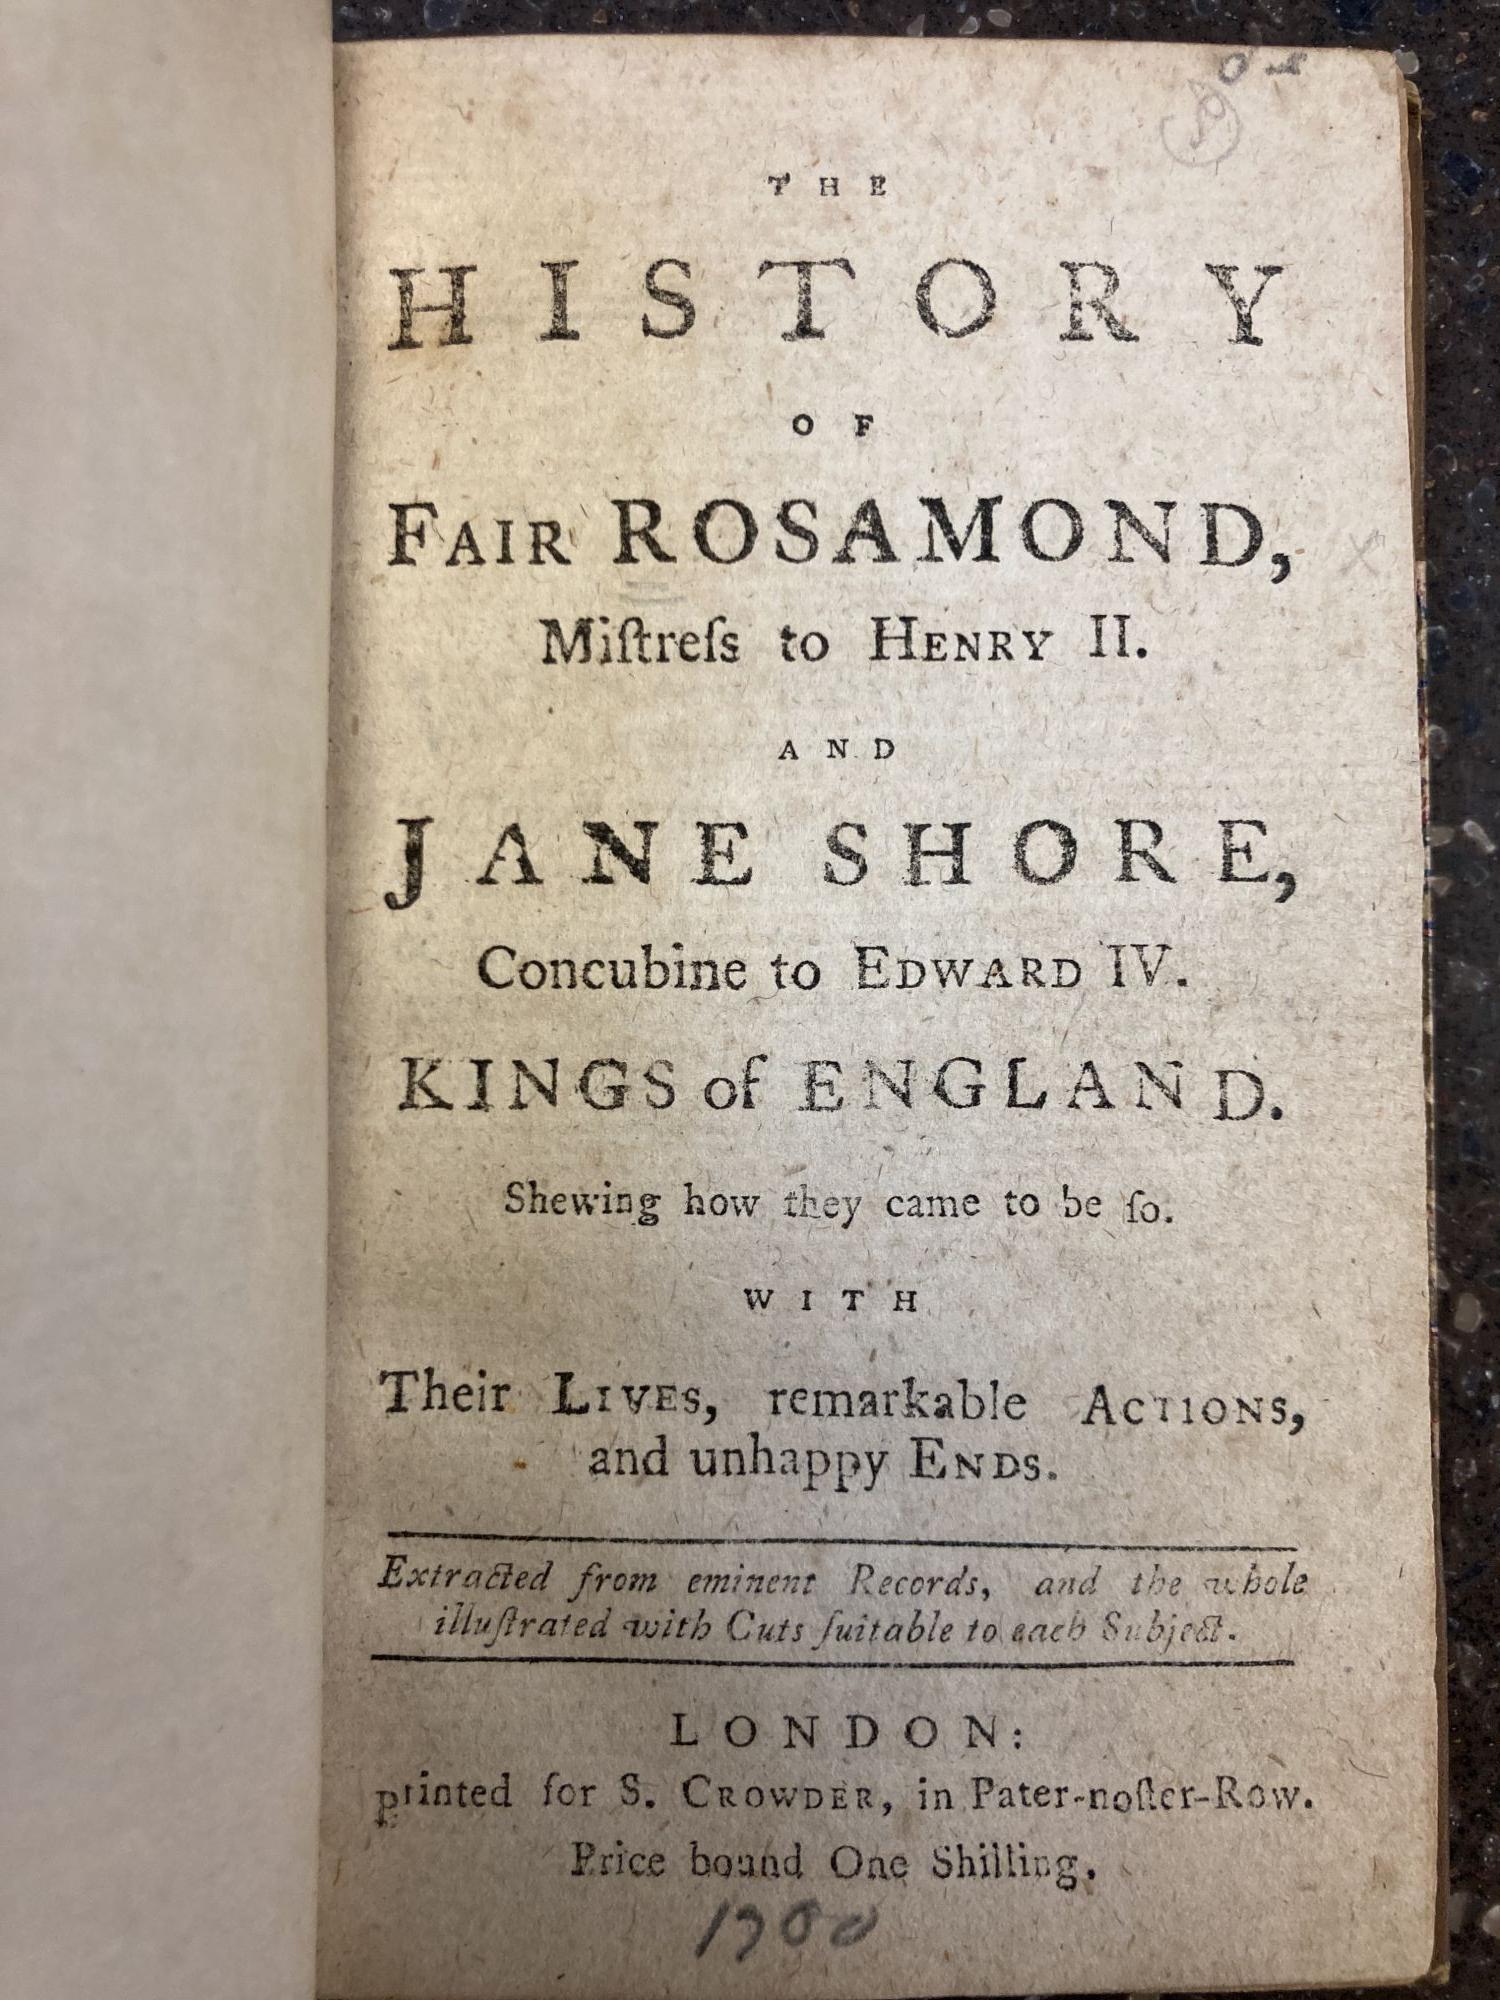 1347375 THE HISTORY OF FAIR ROSAMOND, MISTRESS TO HENRY II. AND JANE SHORE, CONCUBINE TO EDWARD IV. KINGS OF ENGLAND